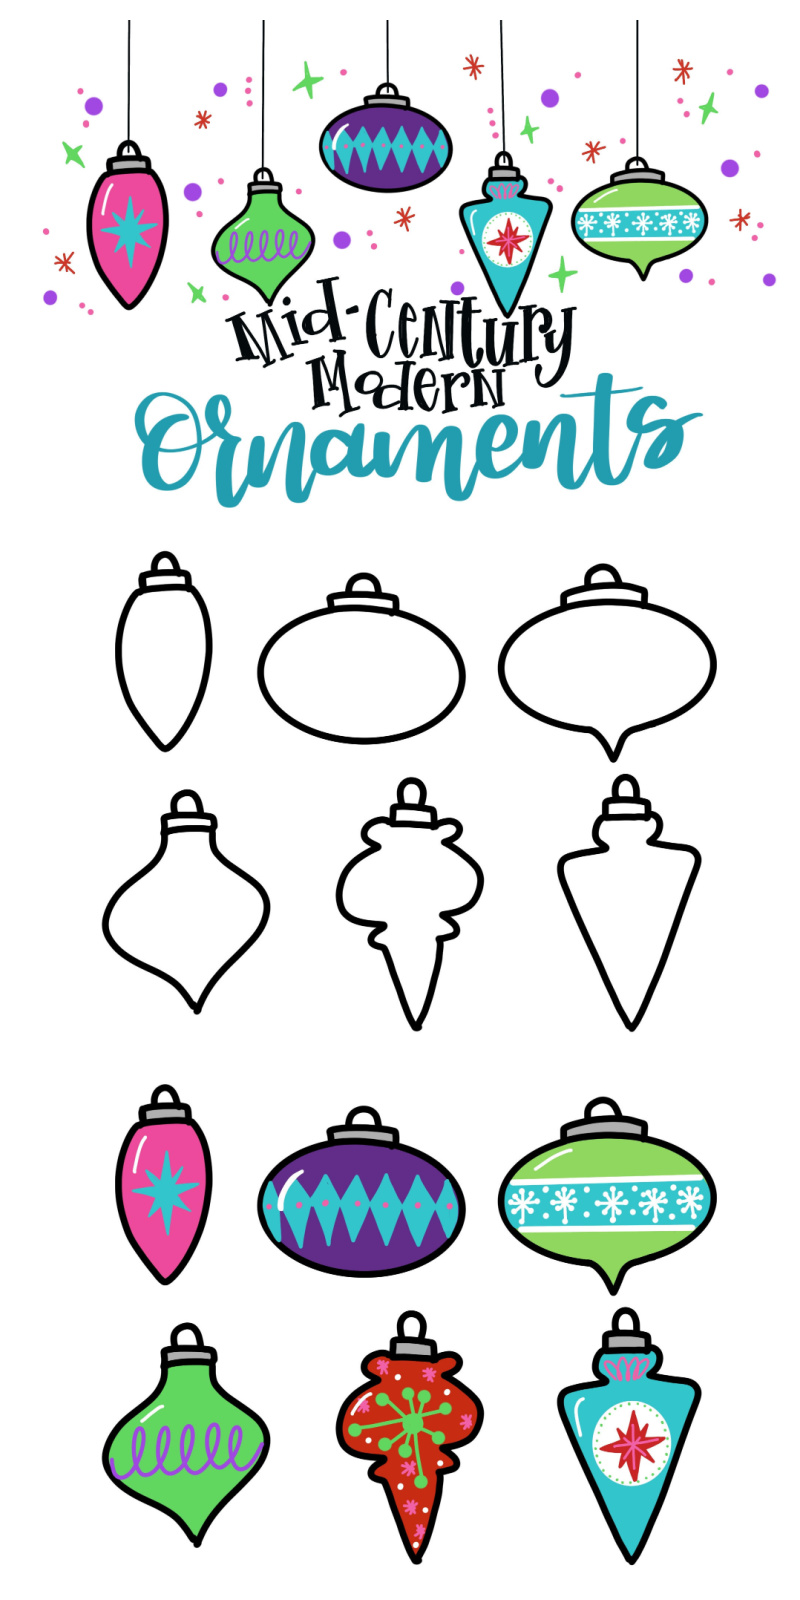 How to Draw Mid-Century Modern Ornaments